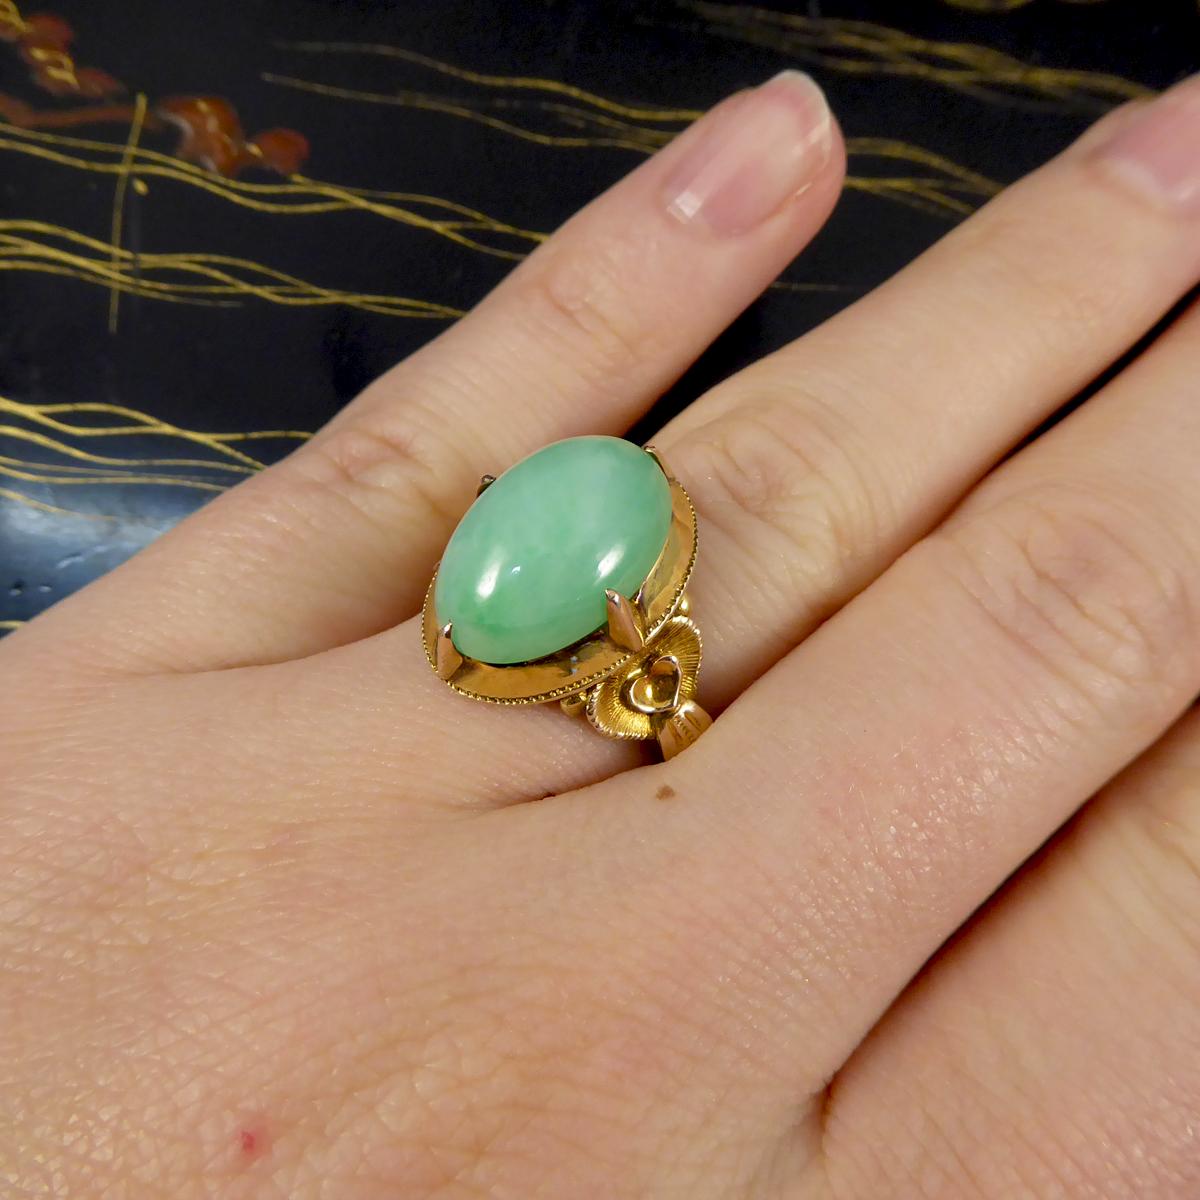 Women's or Men's Vintage Oval Jade Ring in 14 Carat Yellow Gold with Decorative Shoulders